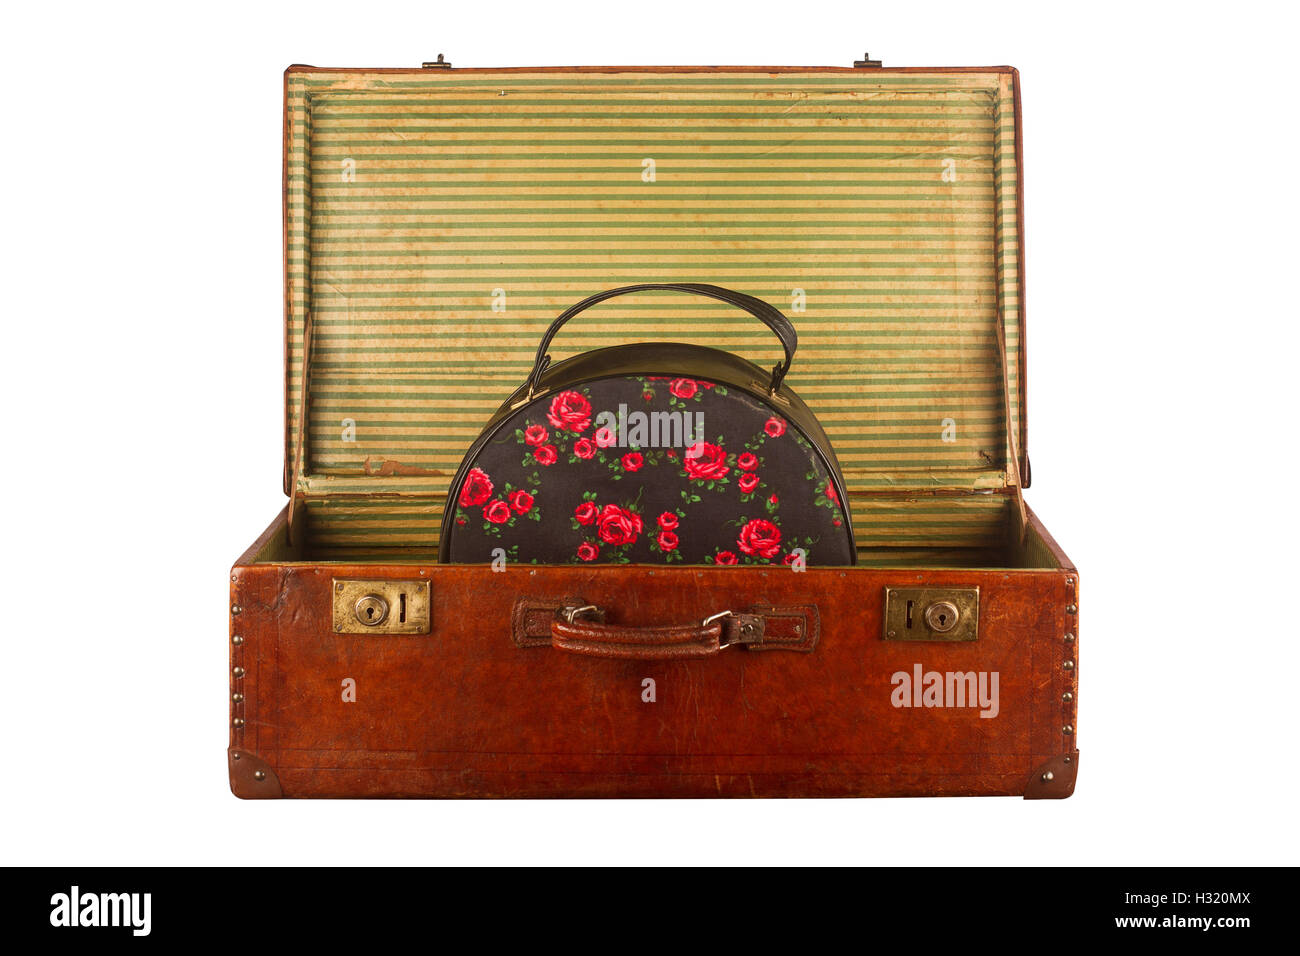 Old vintage open suitcase with roses themed hand luggage isolated on white background Stock Photo